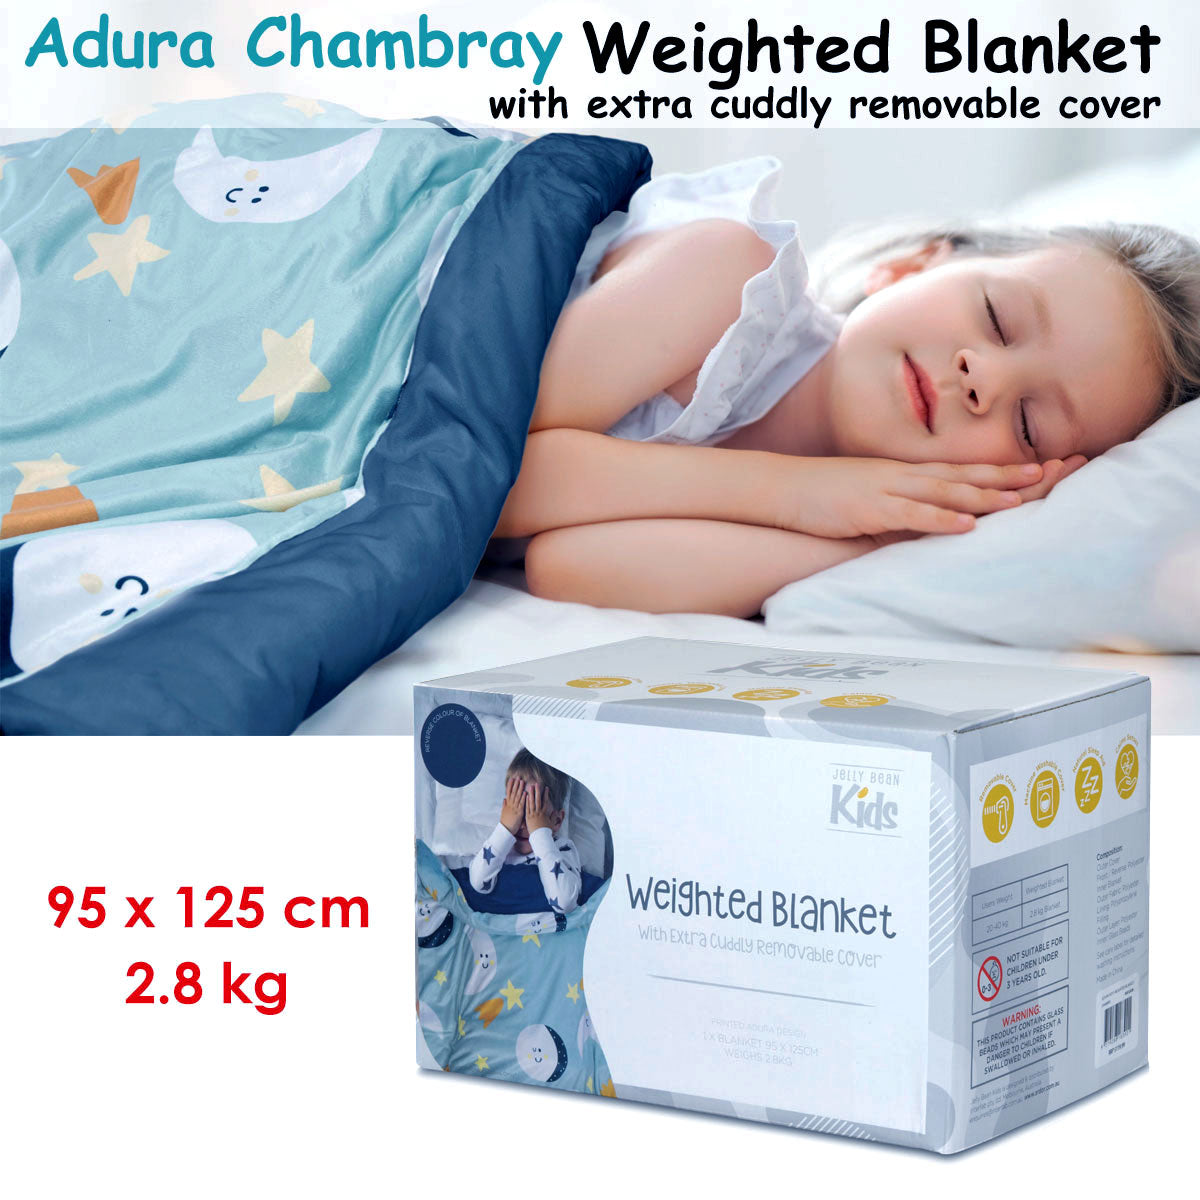 Jelly Bean Kids Adura Chambray Kids Weighted Blanket with Extra Cuddly Removable Cover 2.8kg 95 x 125 cm - Home & Garden > Bedding - Zanlana Design and Home Decor